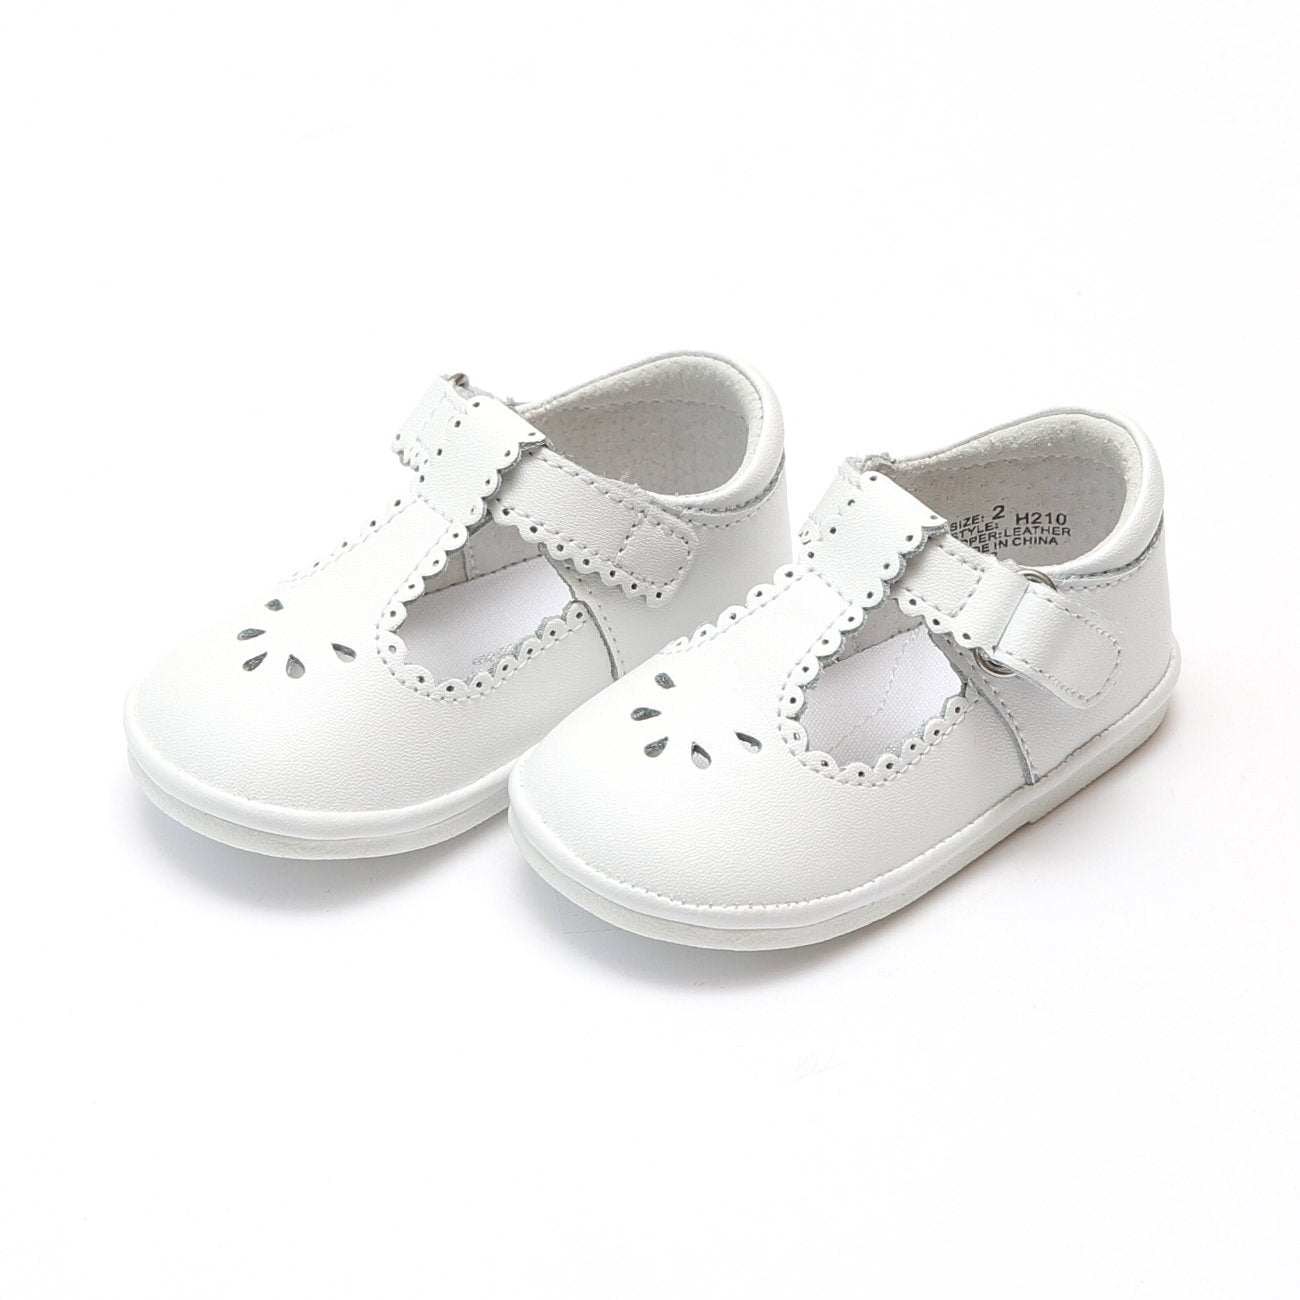 Dottie Mary Jane Girls Shoes L'Amour White 1 